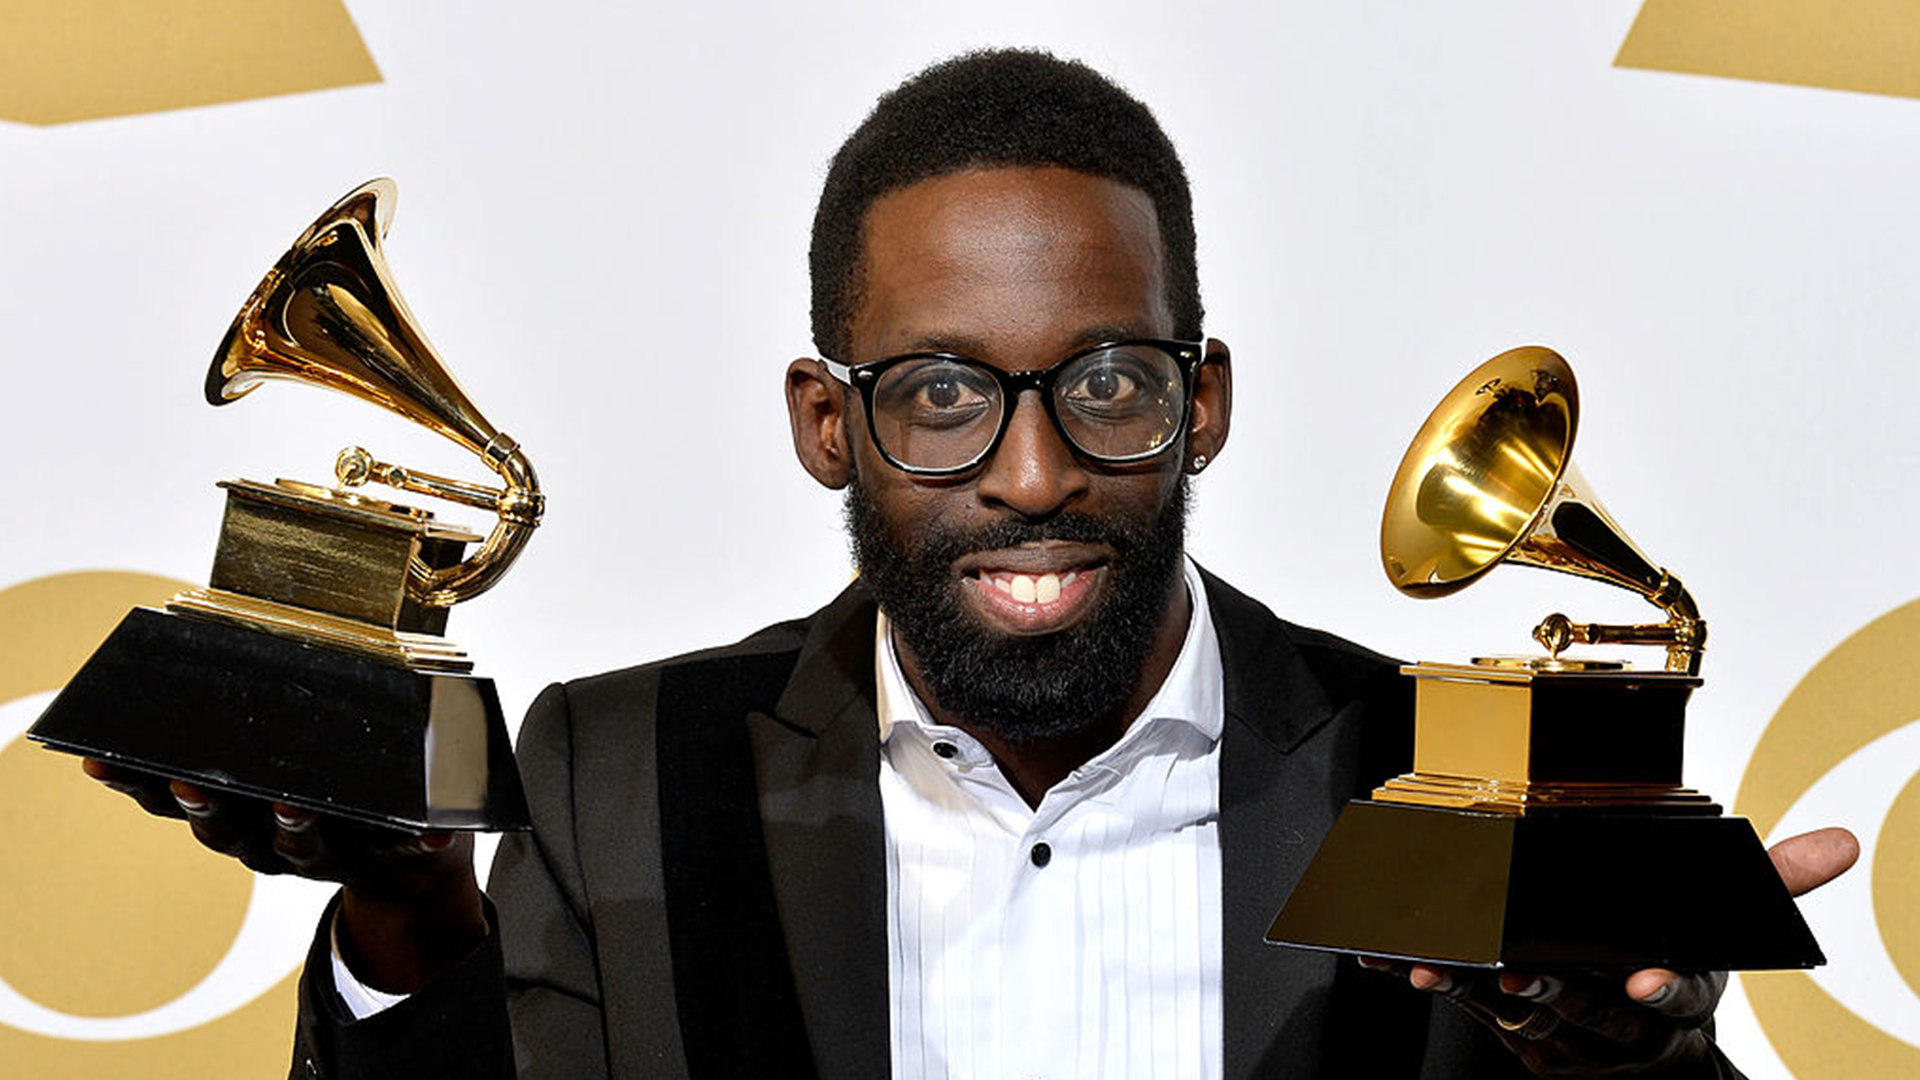 Gospel Artist Tye Tribbett Worked On Justin Timberlake's 'Cry Me A River' And Reveals He 'Only Got Paid $2,000'